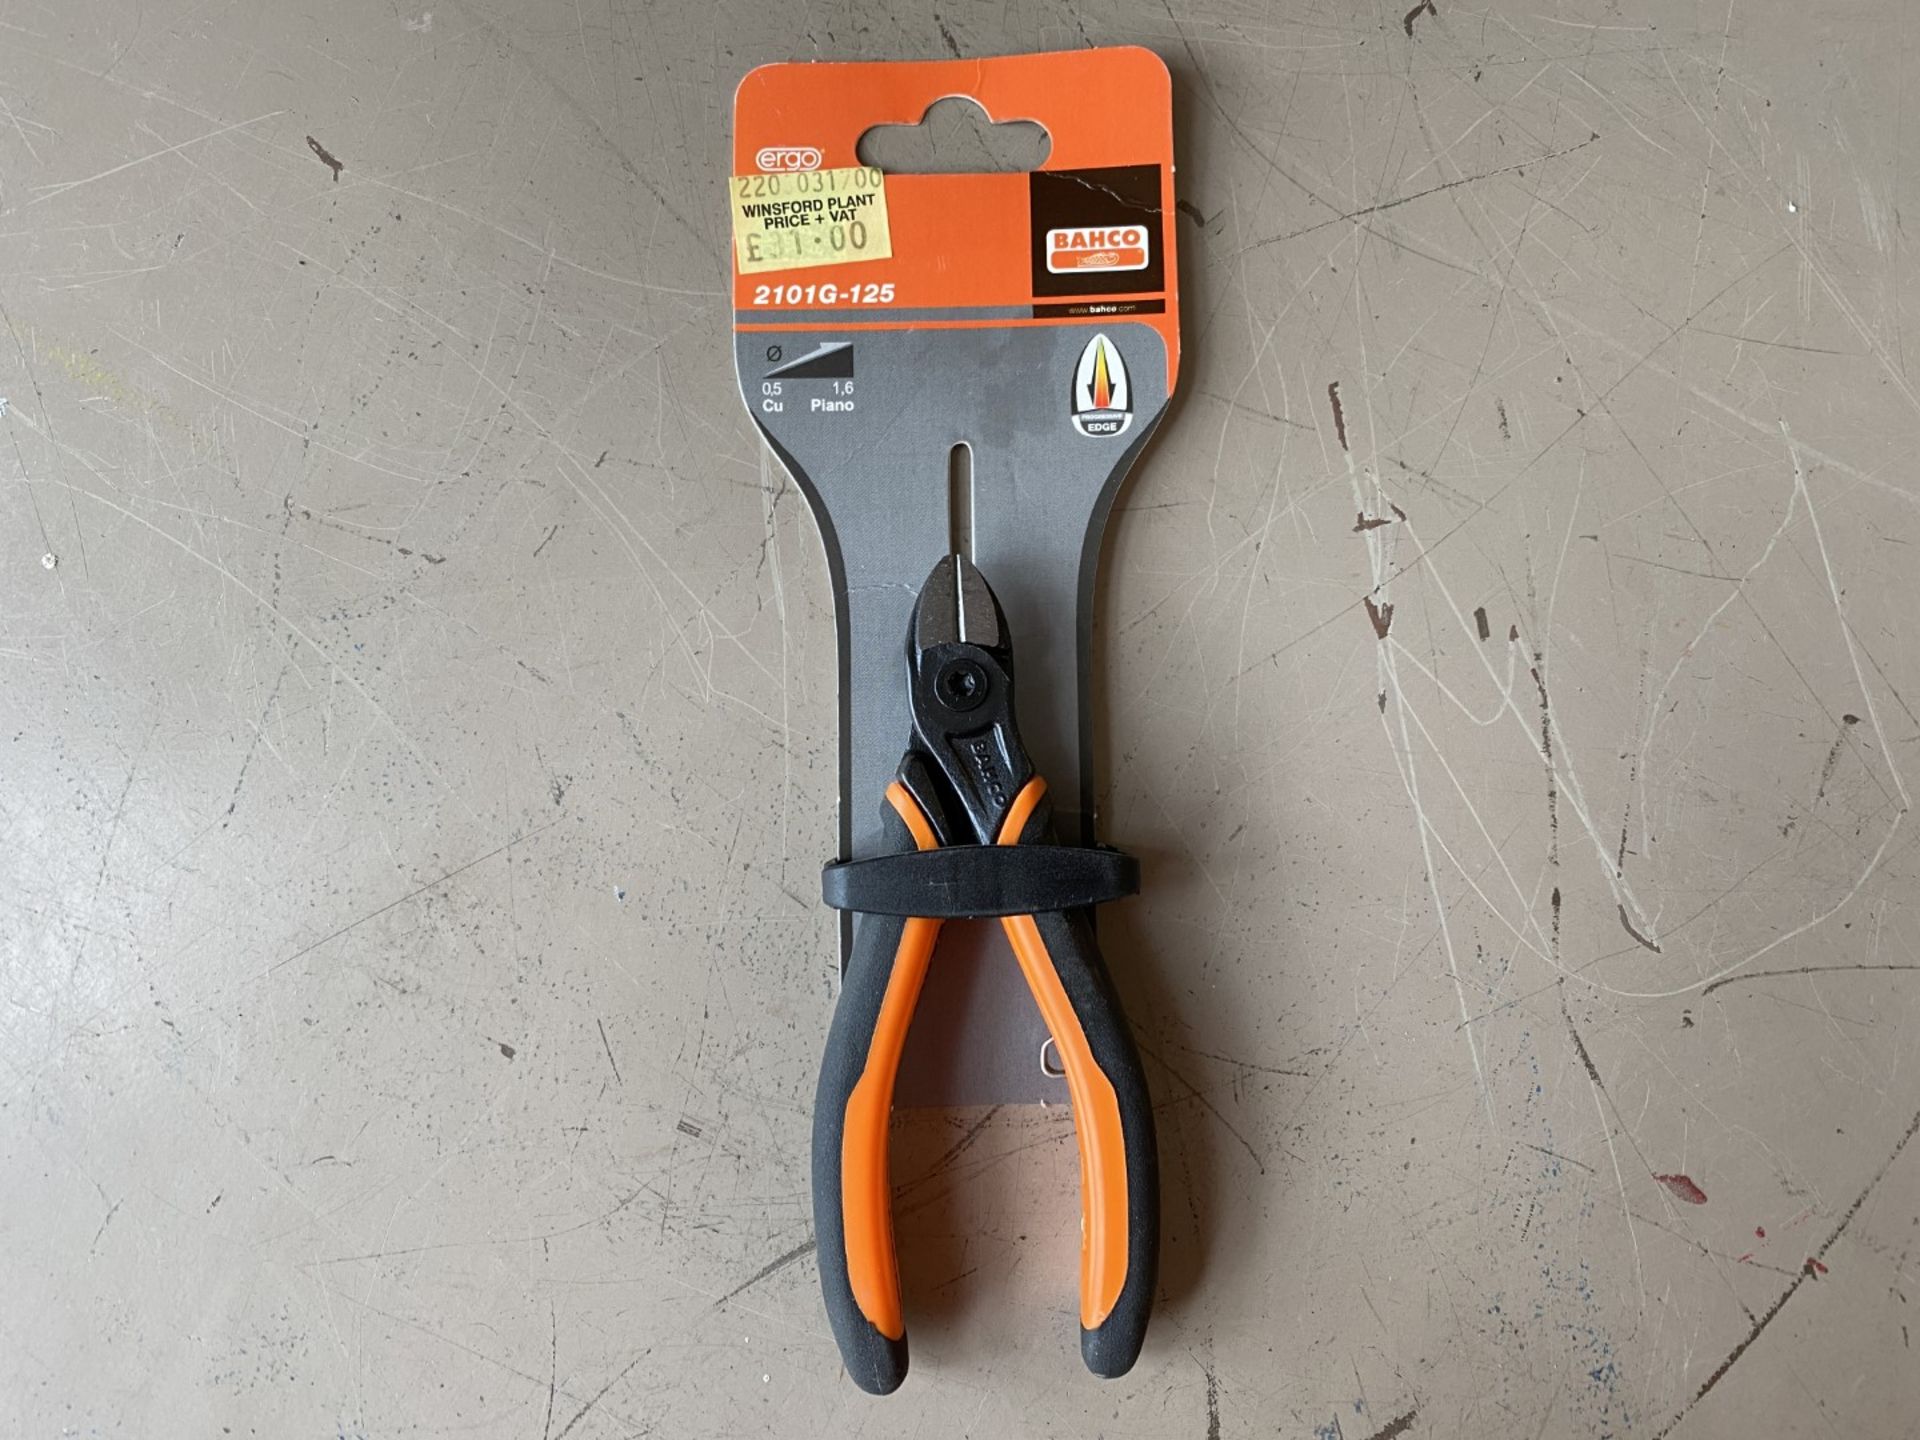 NEW Bahco Ergo side cutting pliers, RRP £31.00